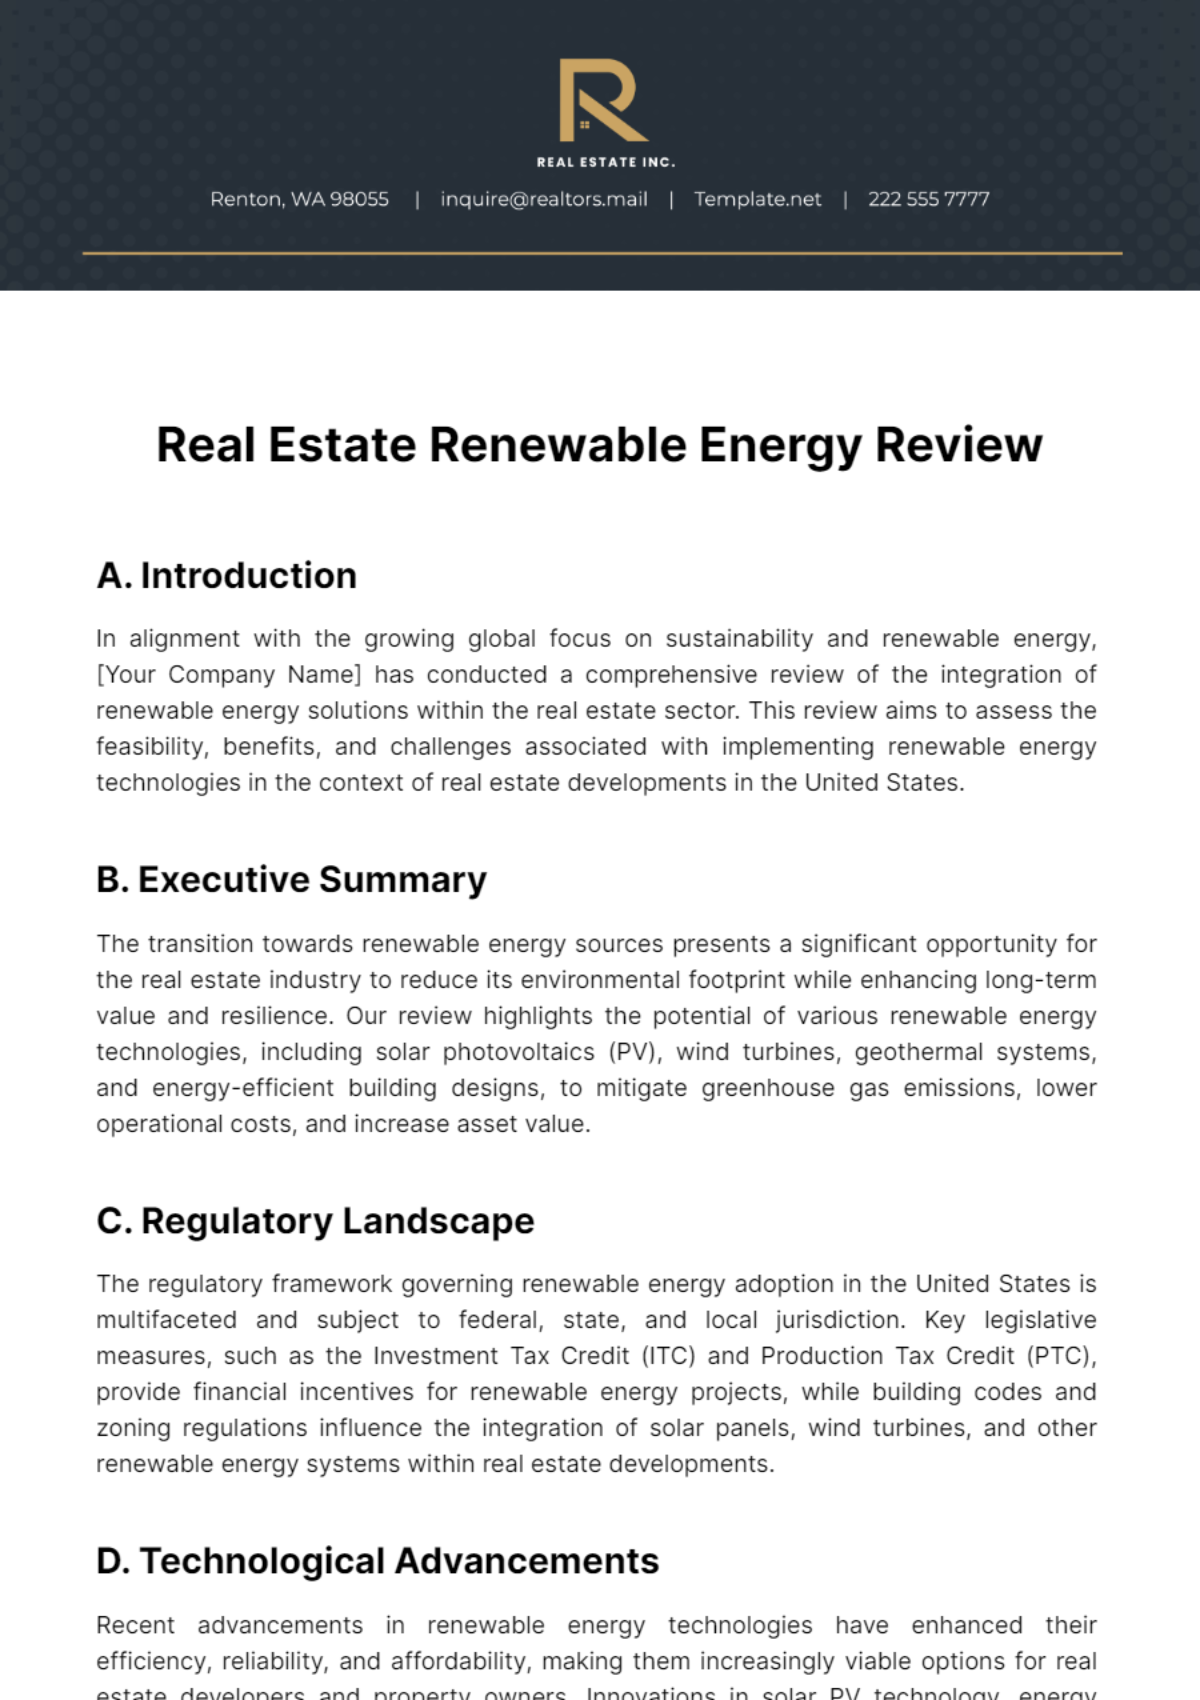 Real Estate Renewable Energy Review Template